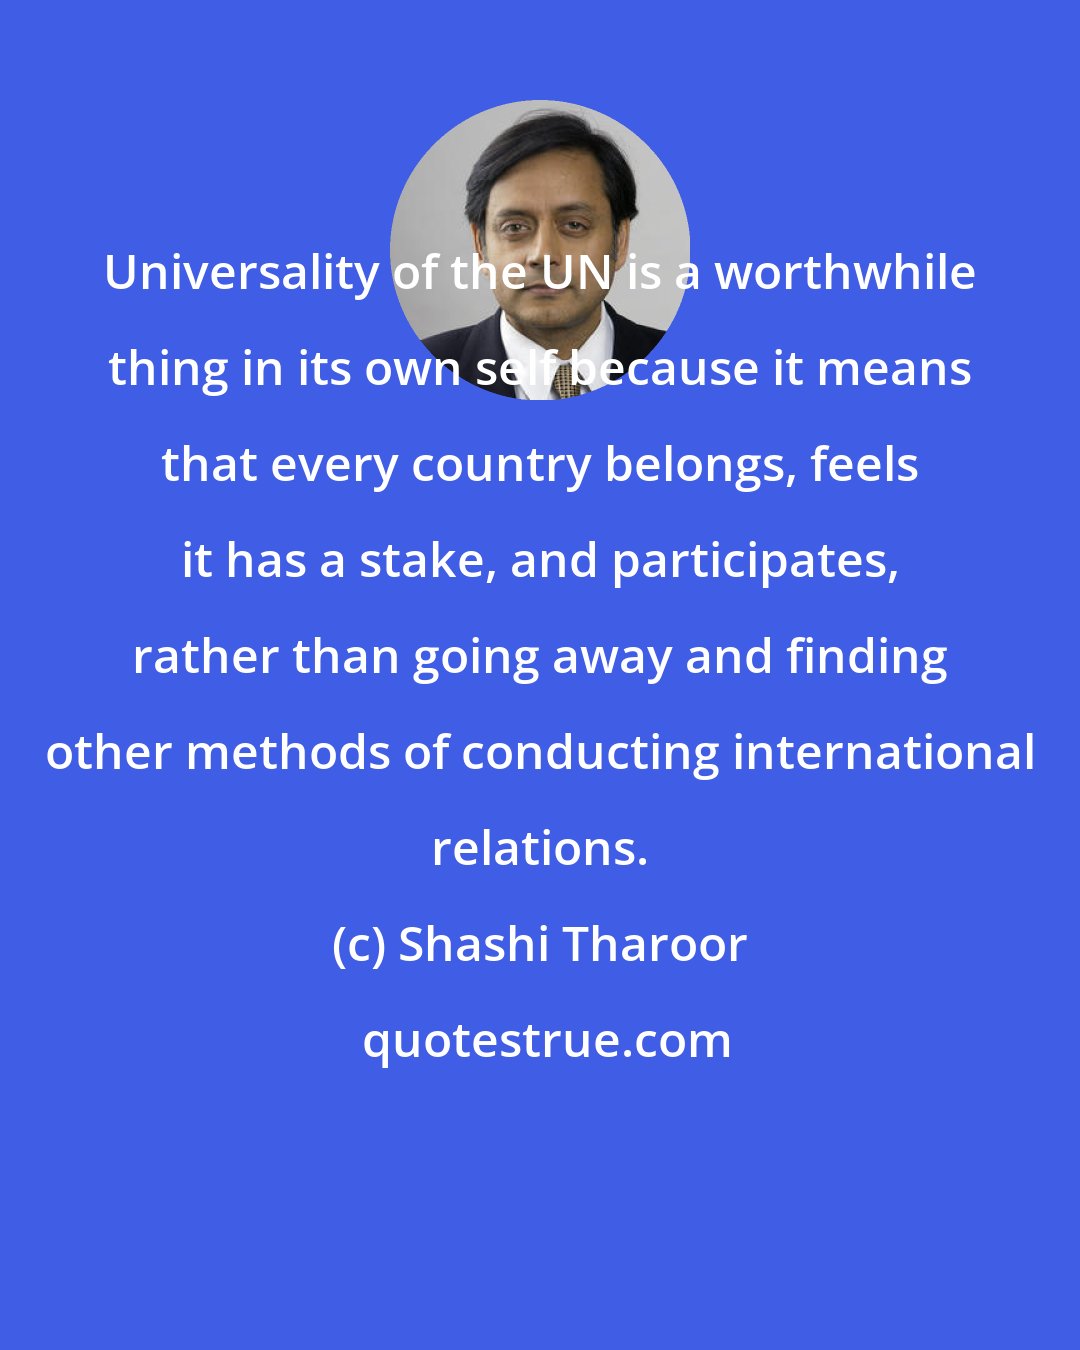 Shashi Tharoor: Universality of the UN is a worthwhile thing in its own self because it means that every country belongs, feels it has a stake, and participates, rather than going away and finding other methods of conducting international relations.